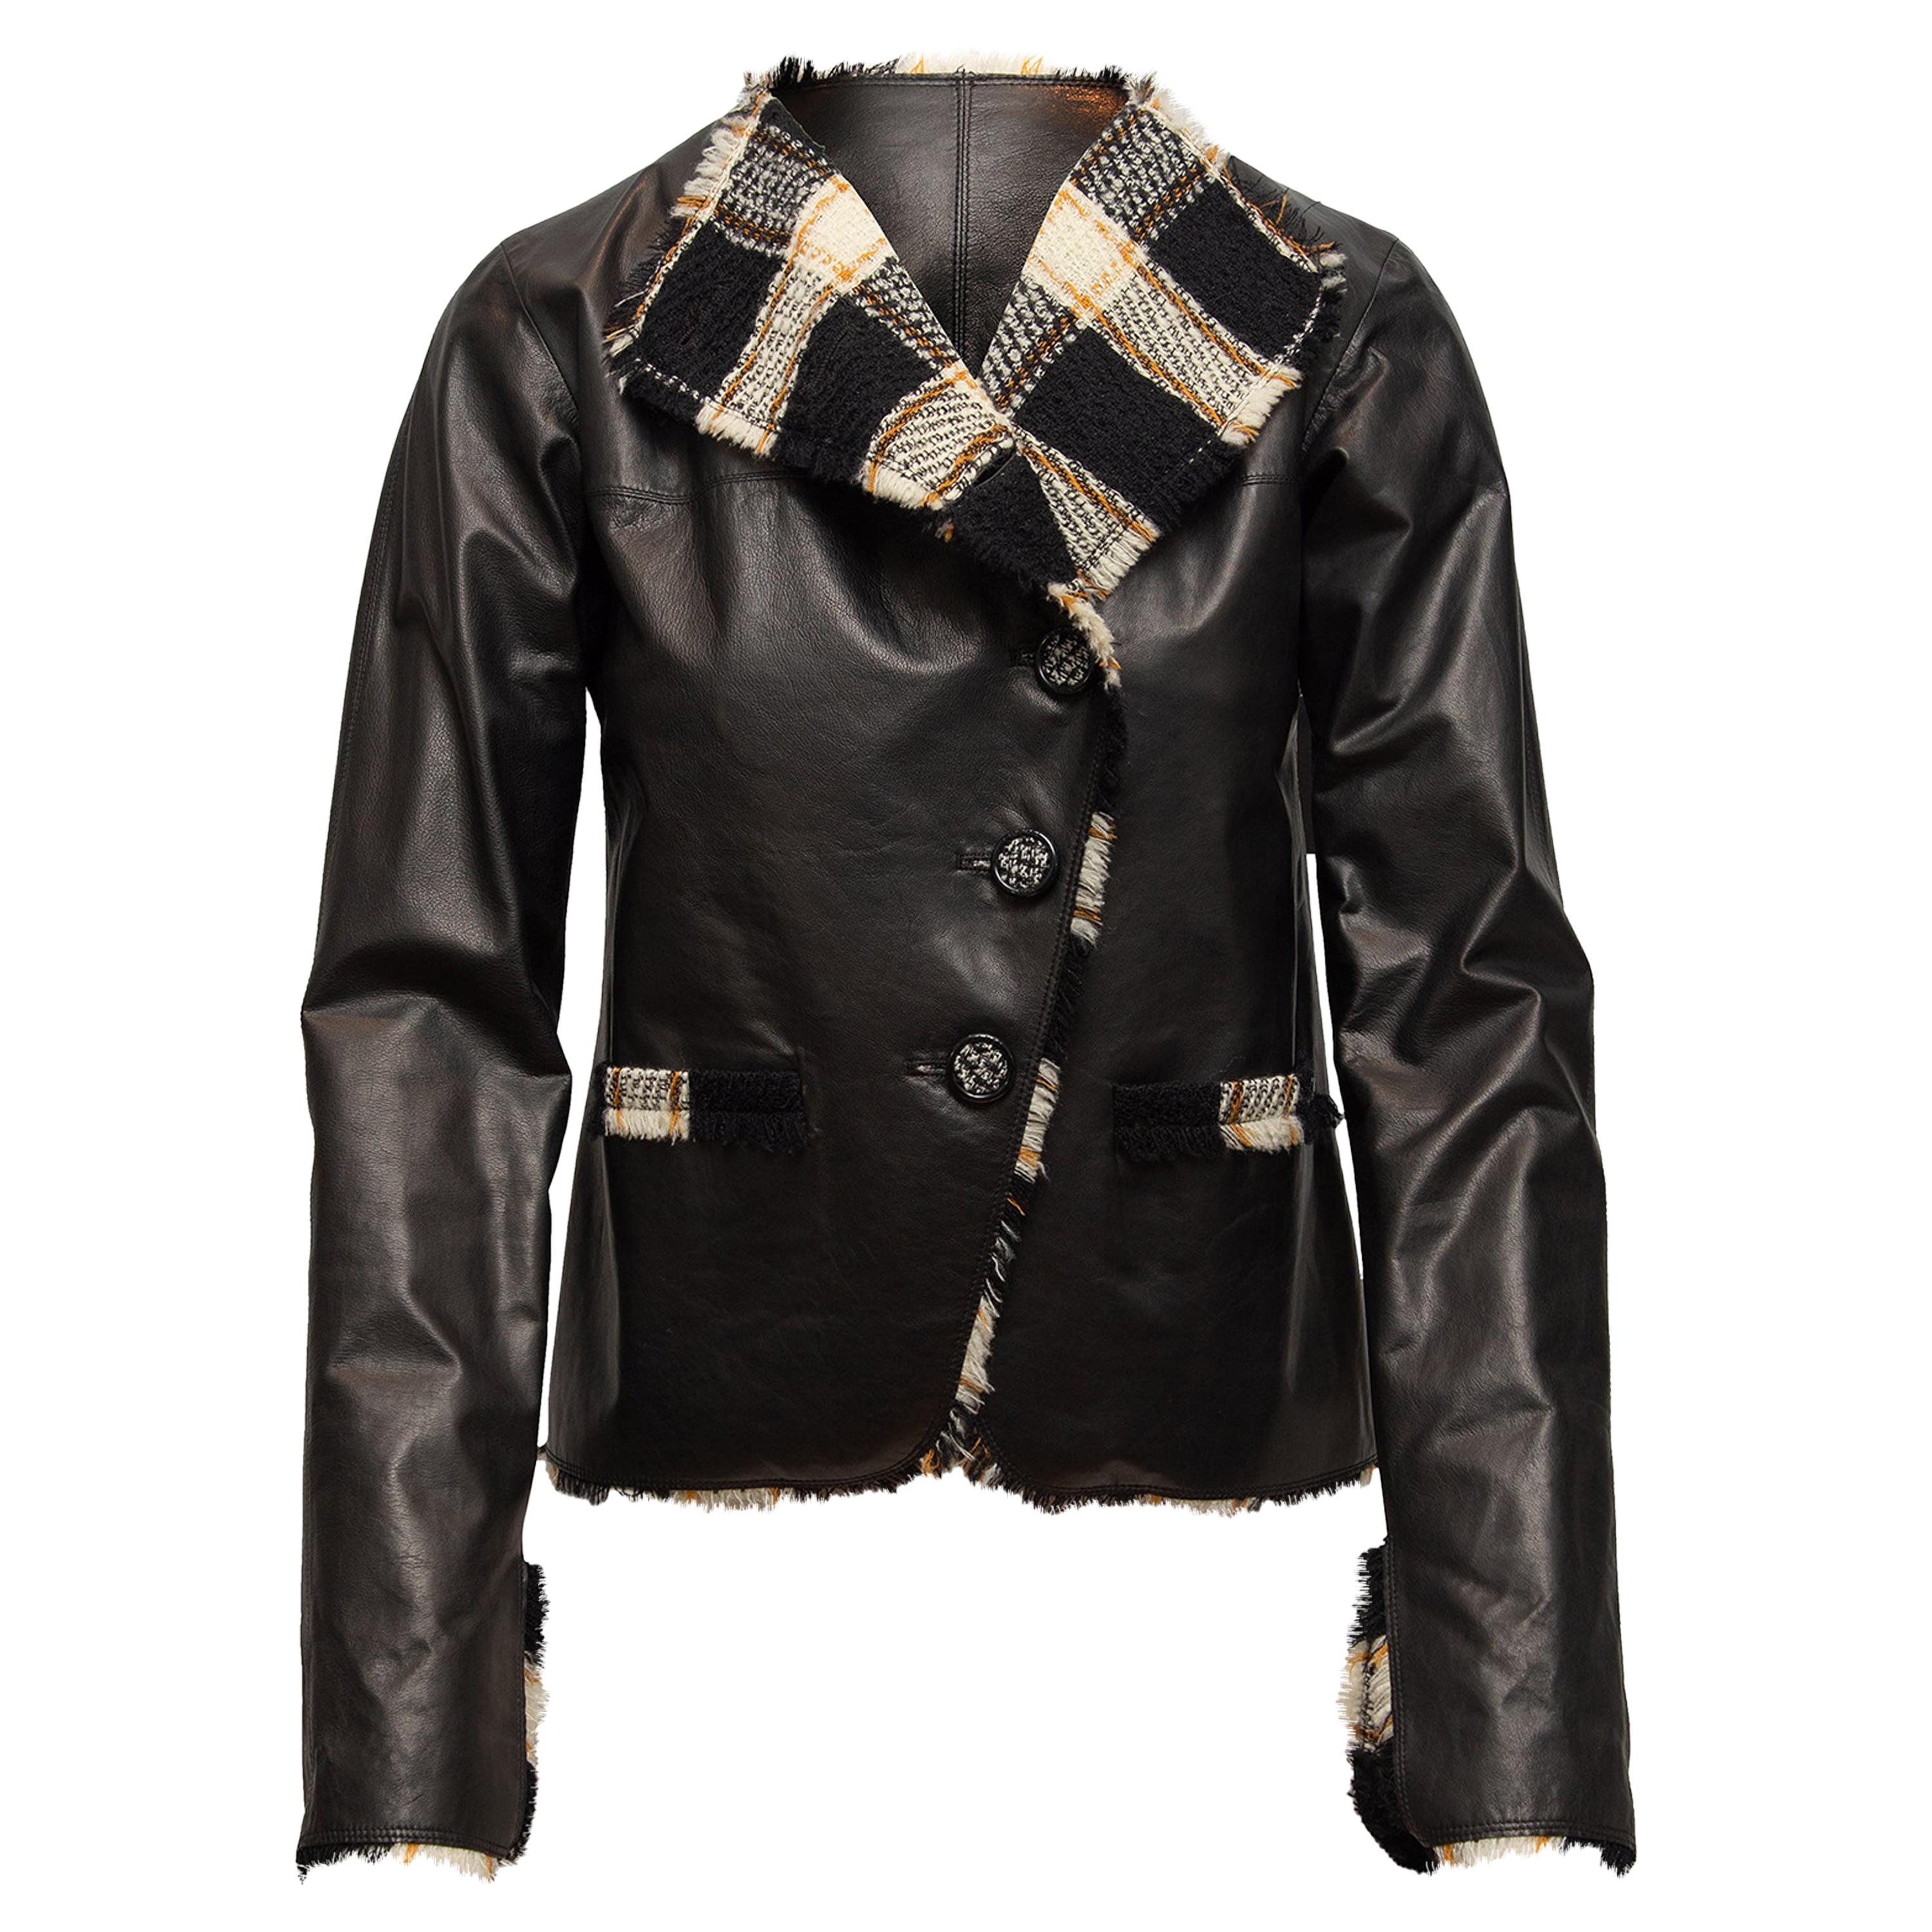  Chanel Black & Multicolor Fall 2007 Leather & Tweed Jacket